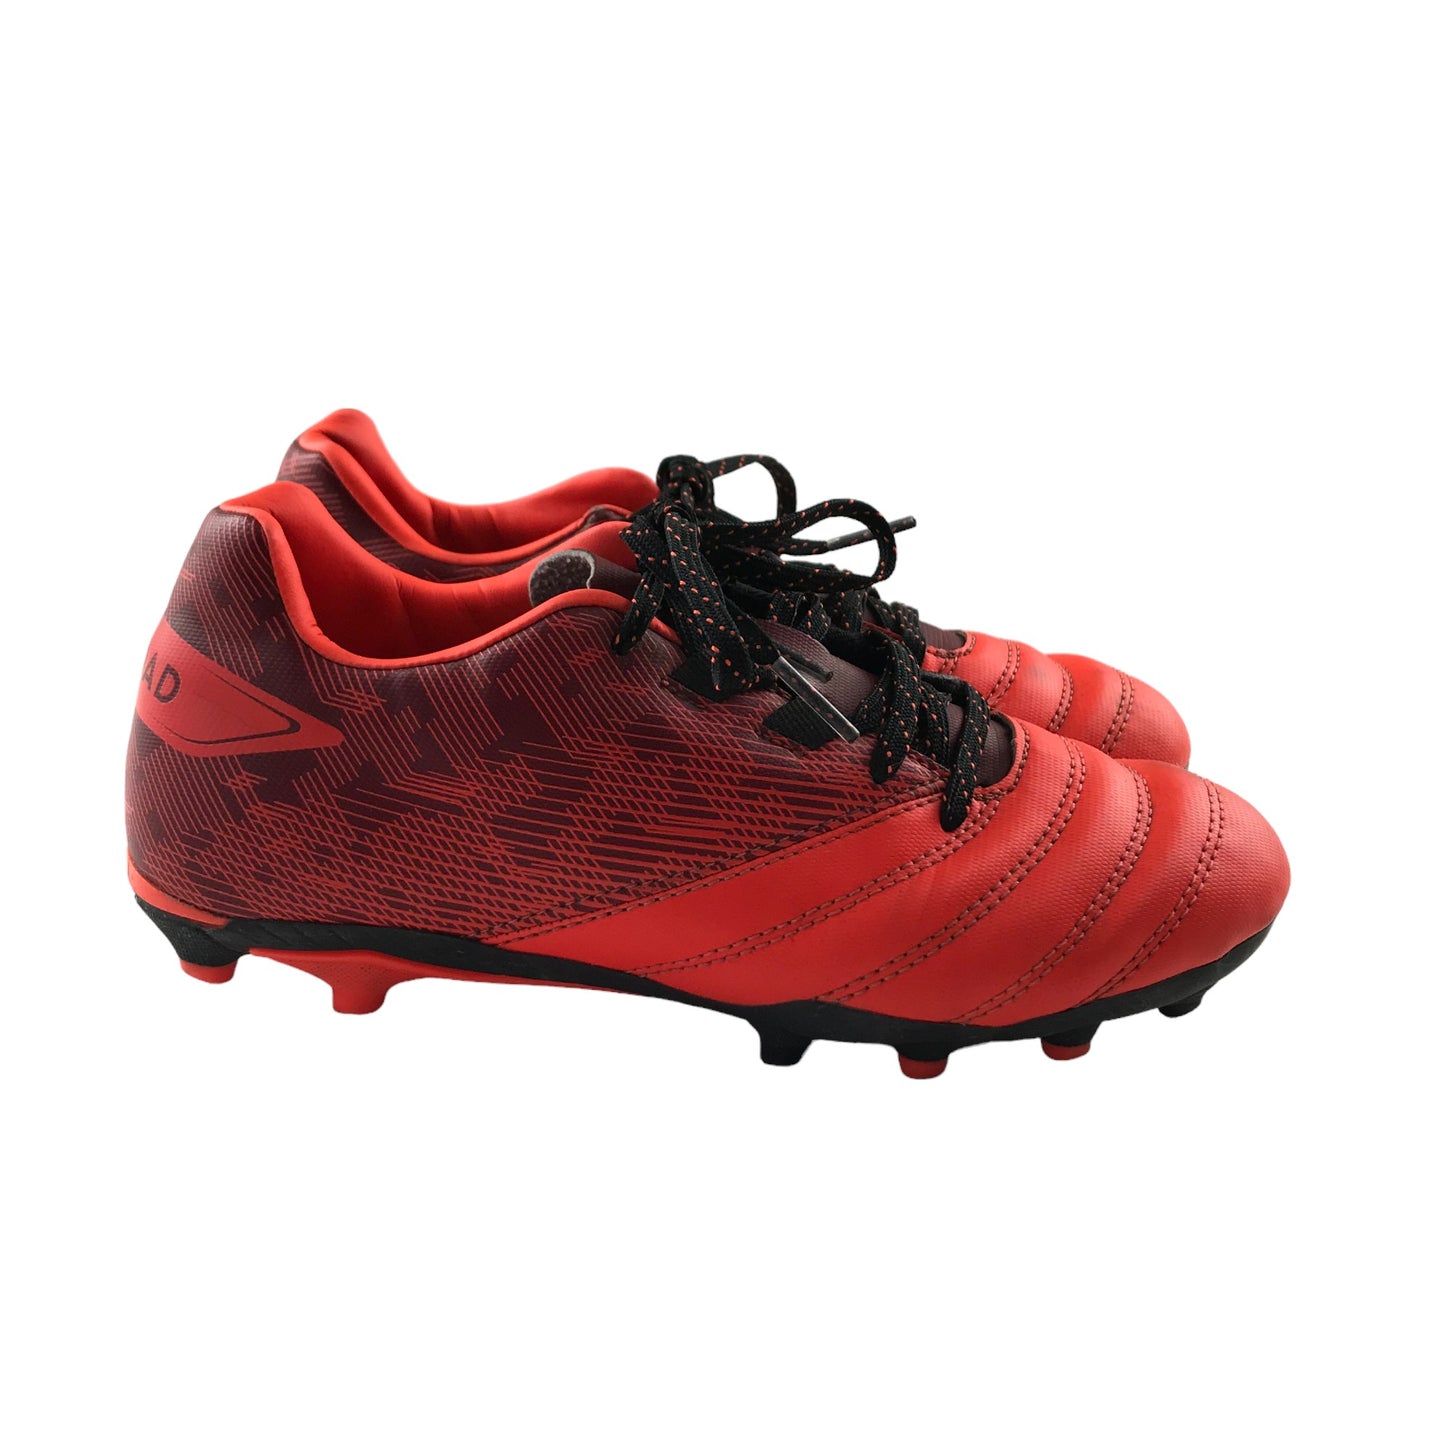 Decathlon Kipsta Football Boots Shoe Size 2 Red with Plastic studs